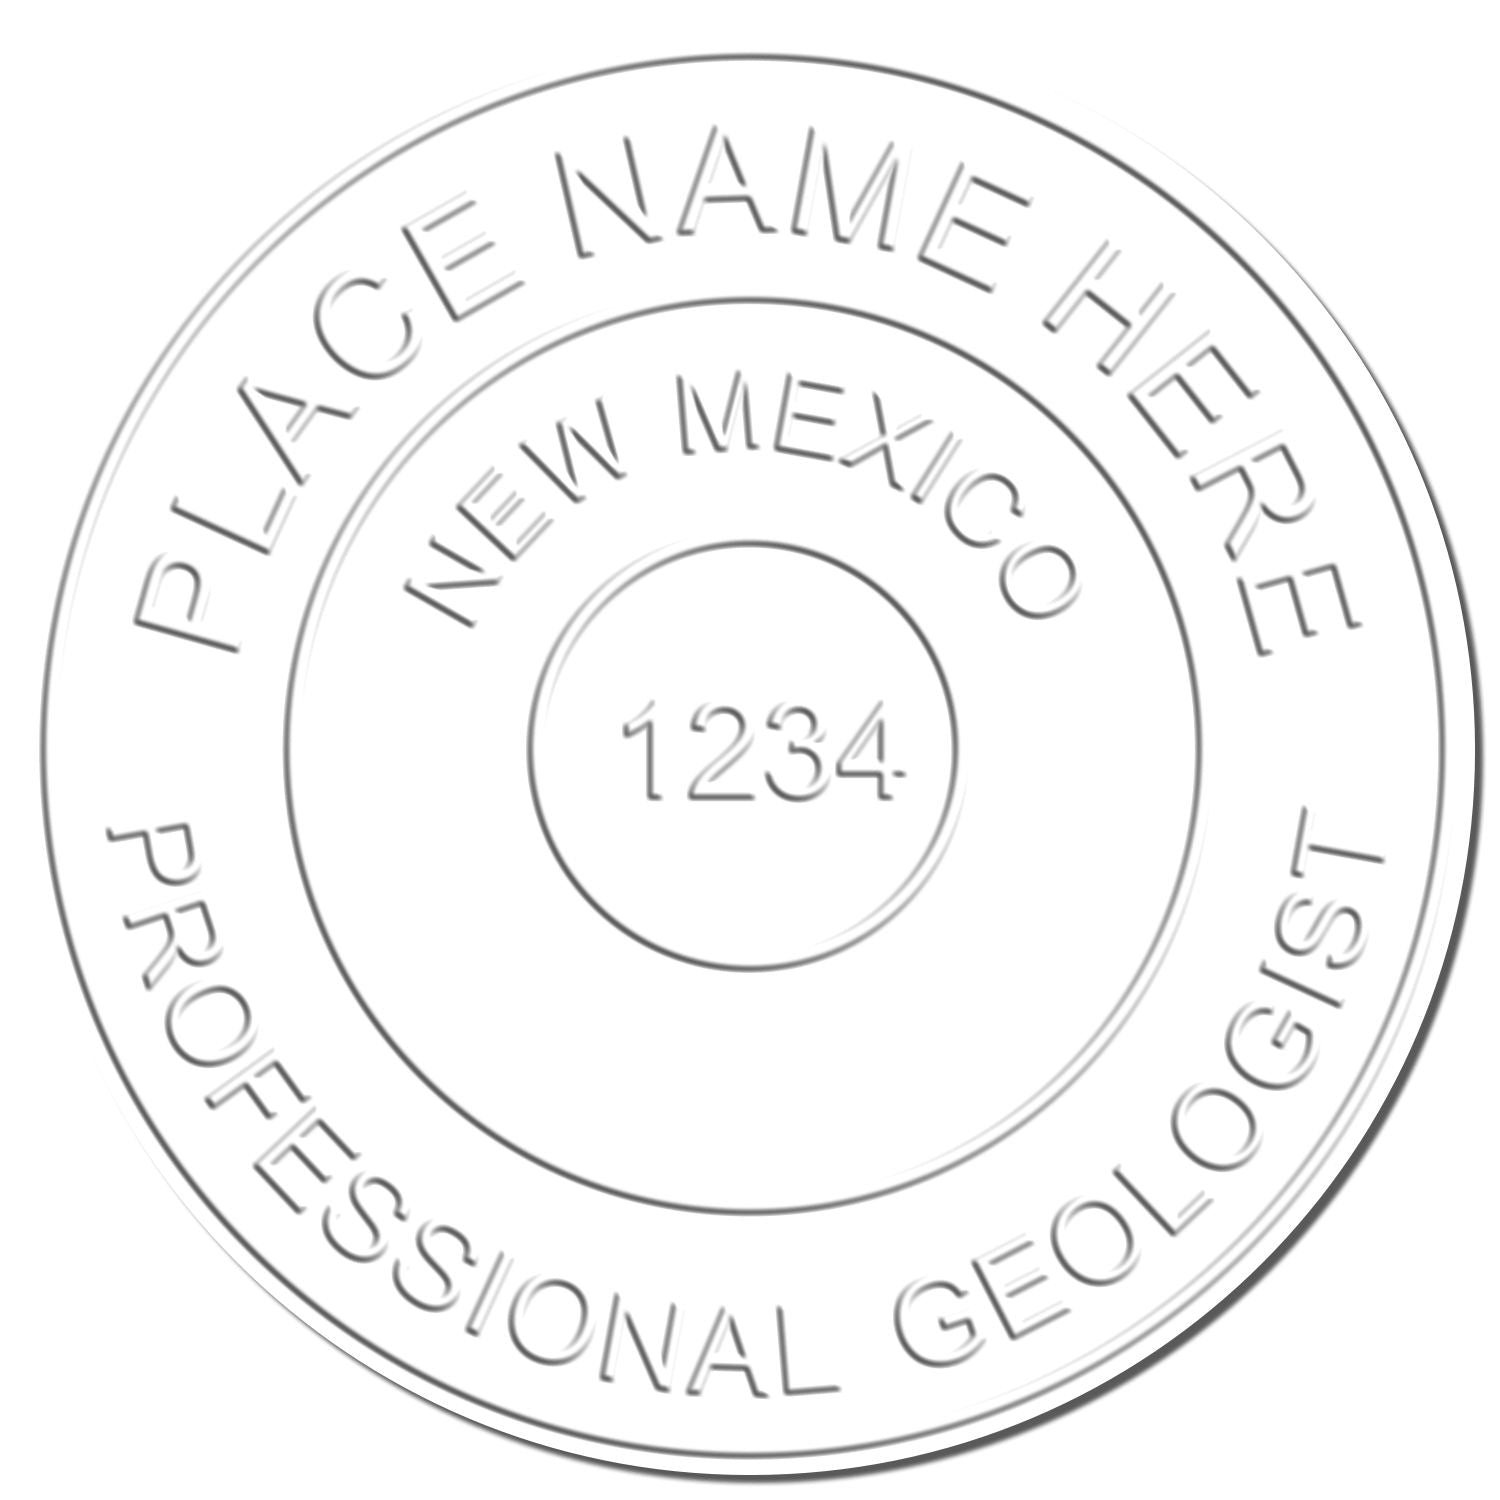 The main image for the New Mexico Geologist Desk Seal depicting a sample of the imprint and imprint sample